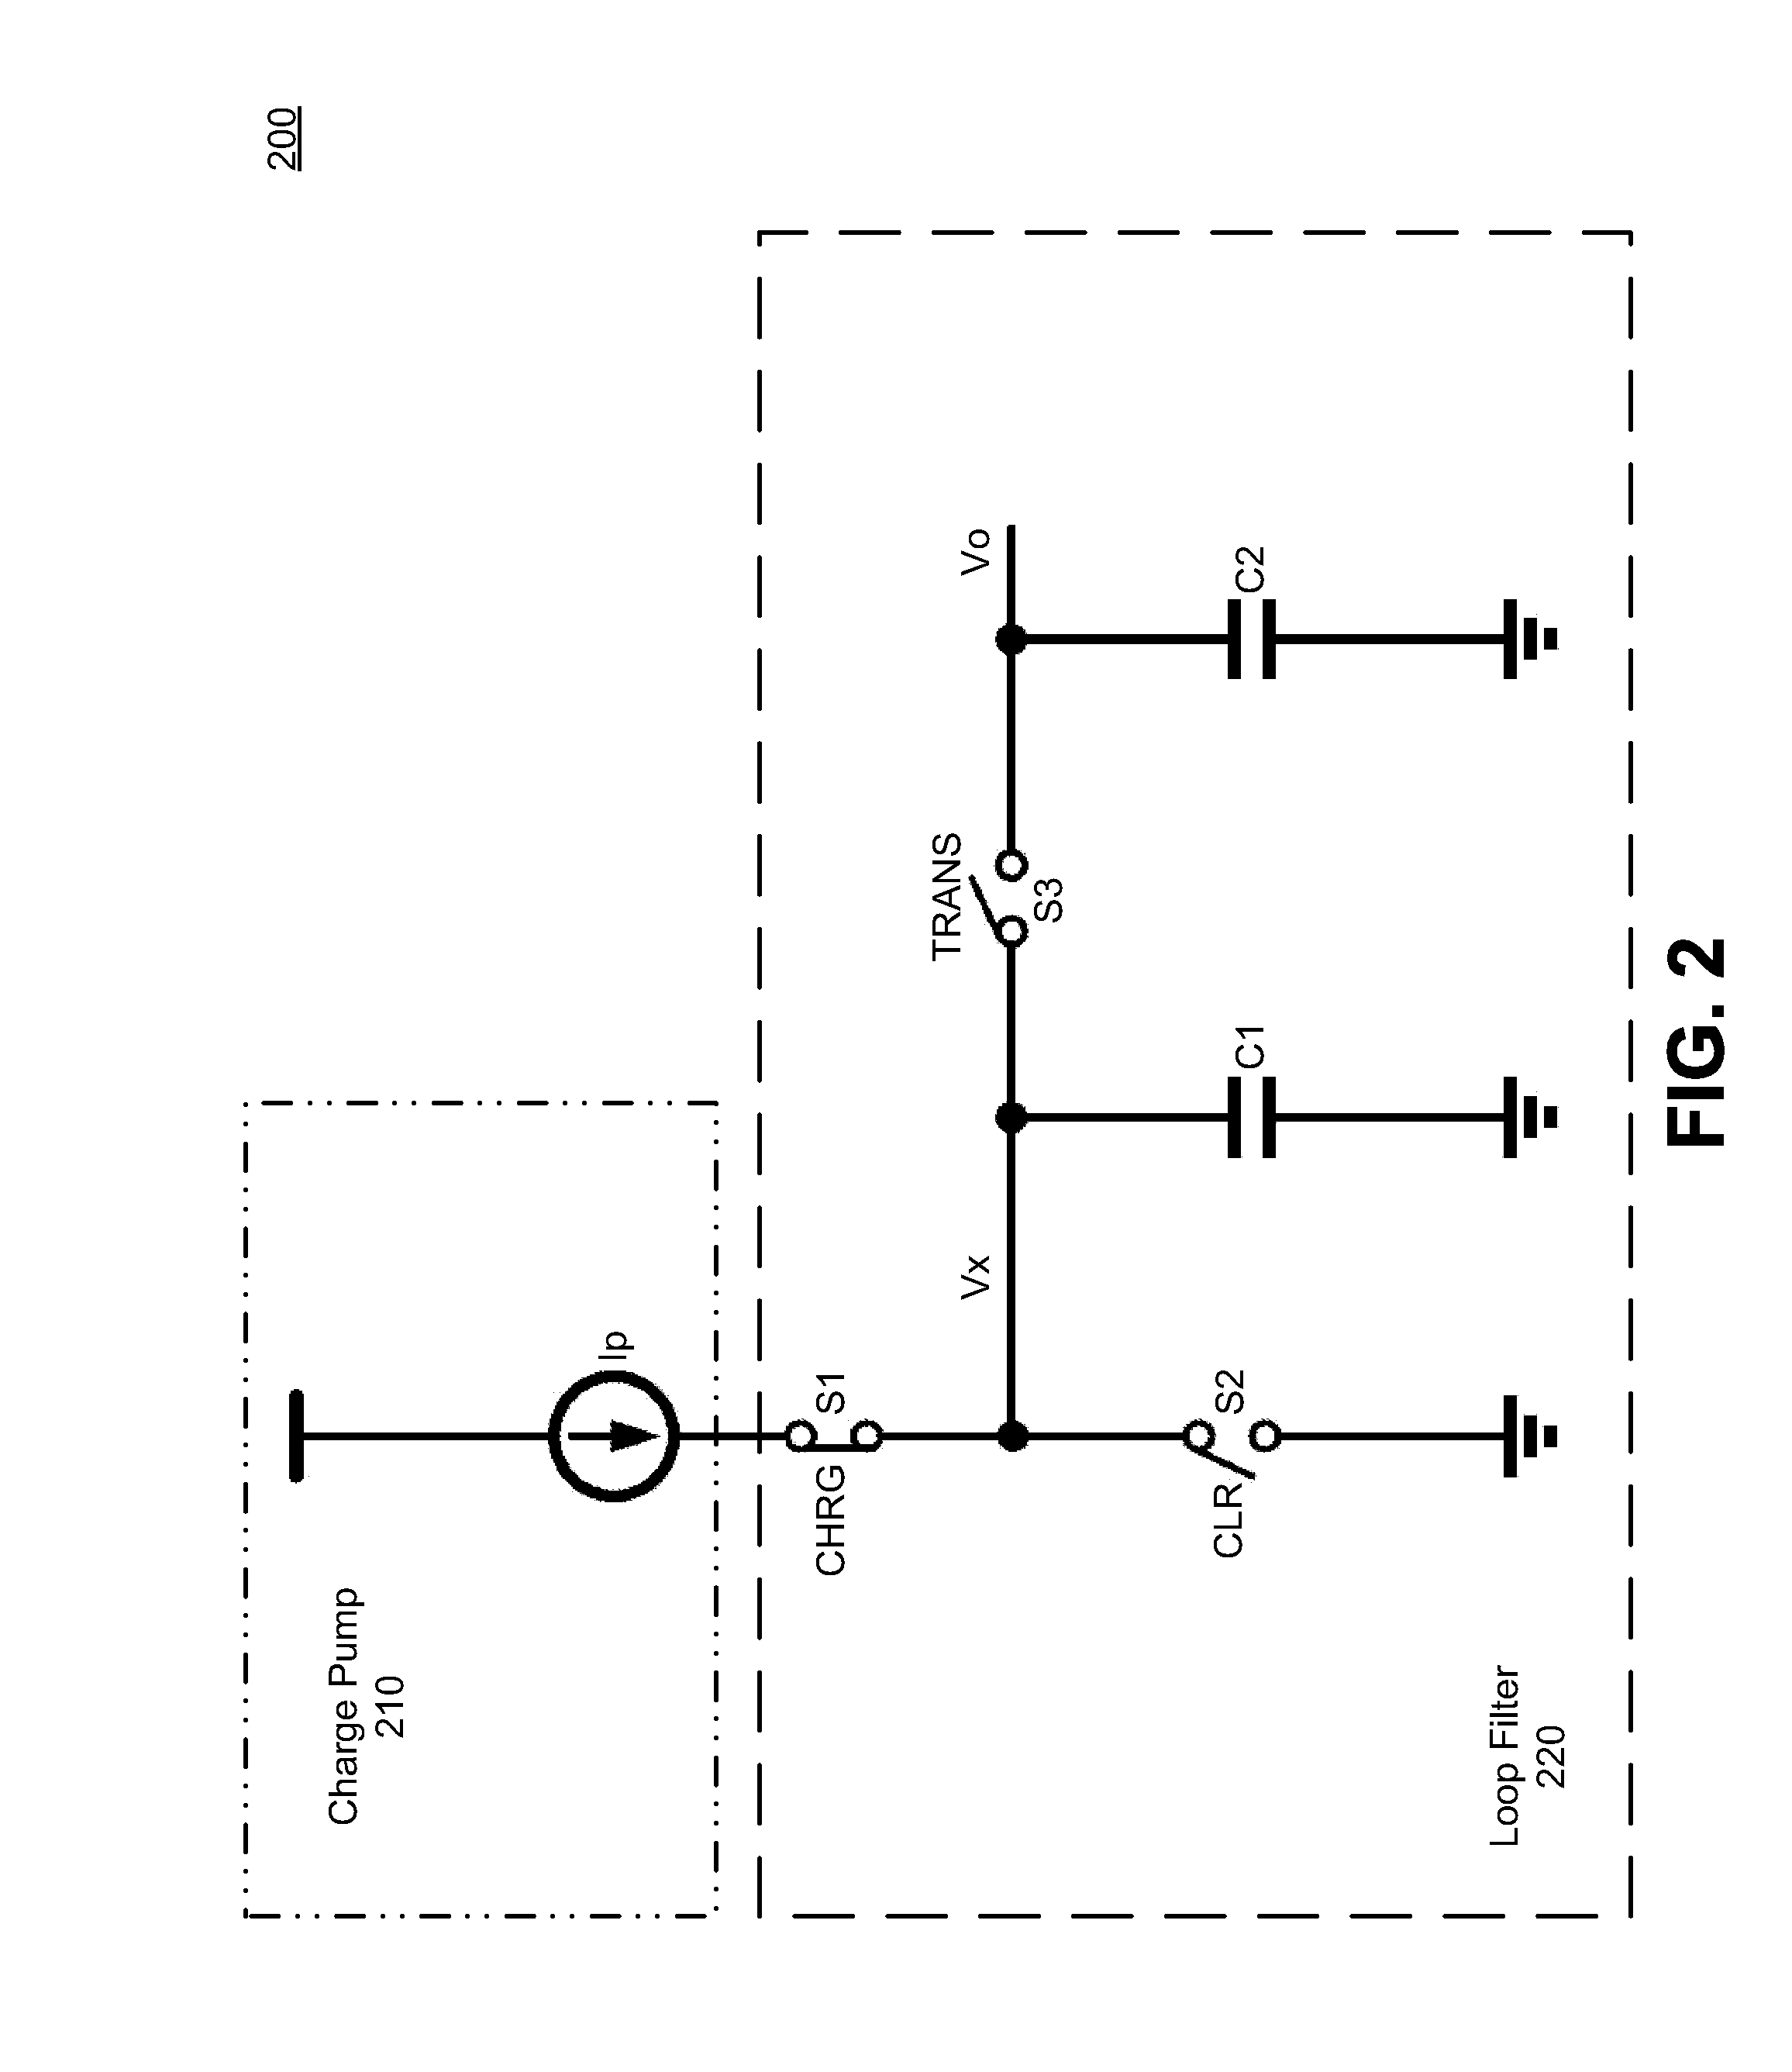 Phase Locked Loop with Sub-harmonic Locking Prevention Functionality